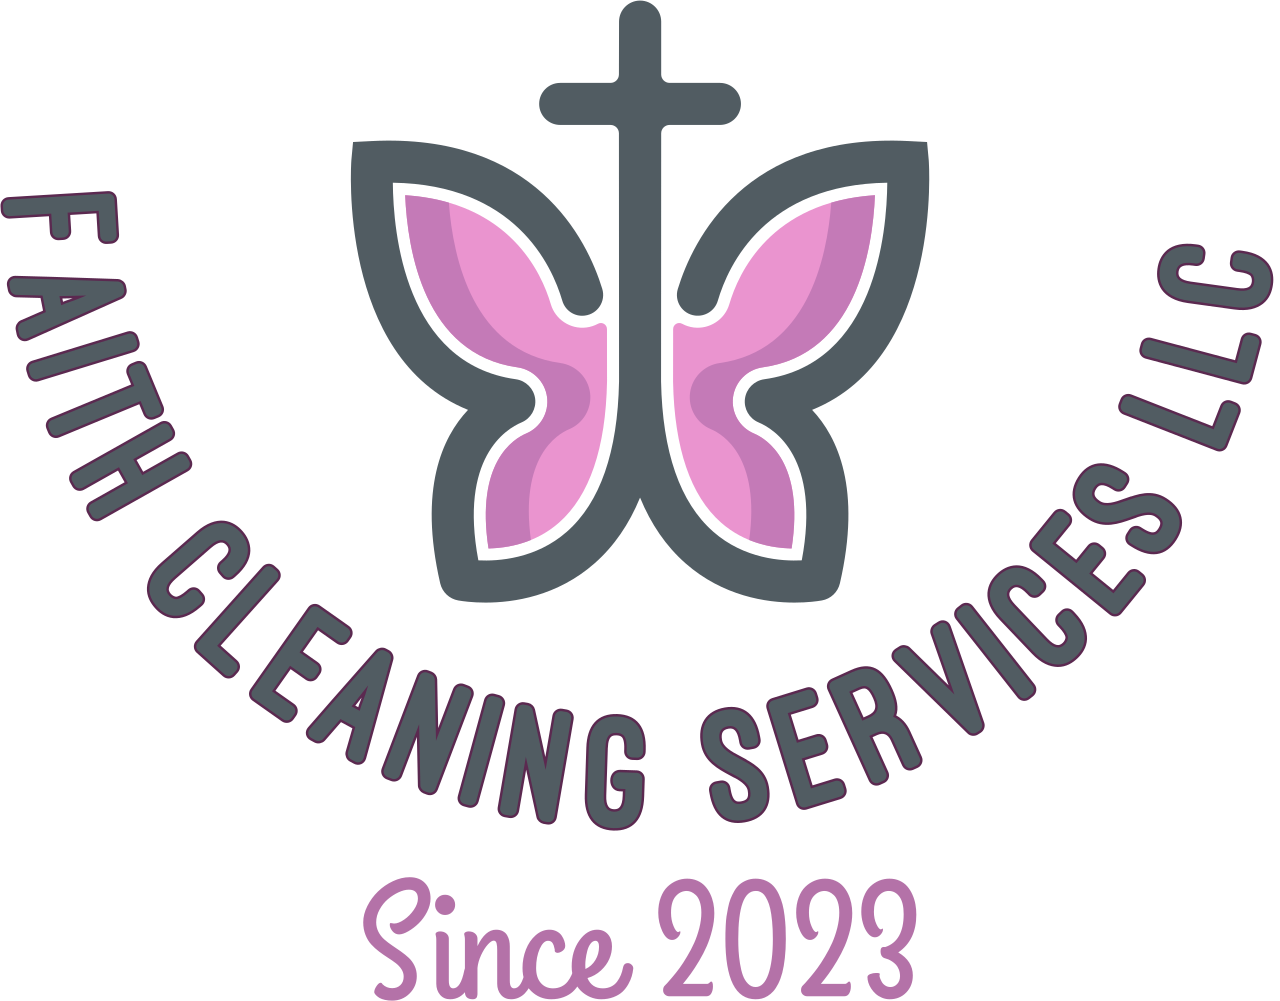 Faith cleaning services LLC 's web page